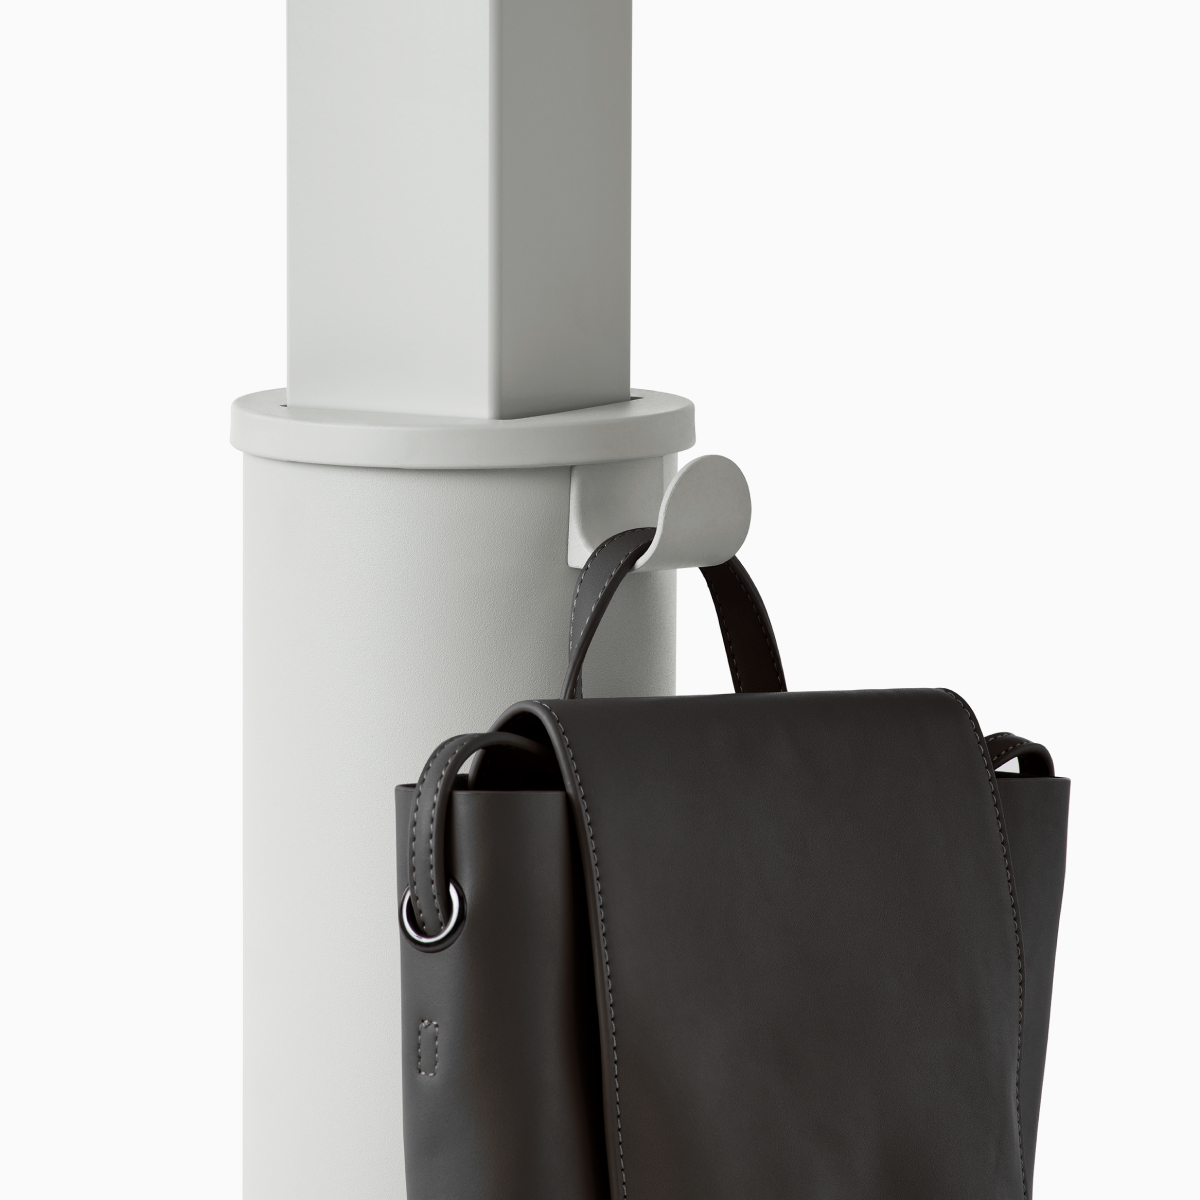 Detail of a grey OE1 Sit-to-Stand Table column with a black bag hanging from the bag hook.